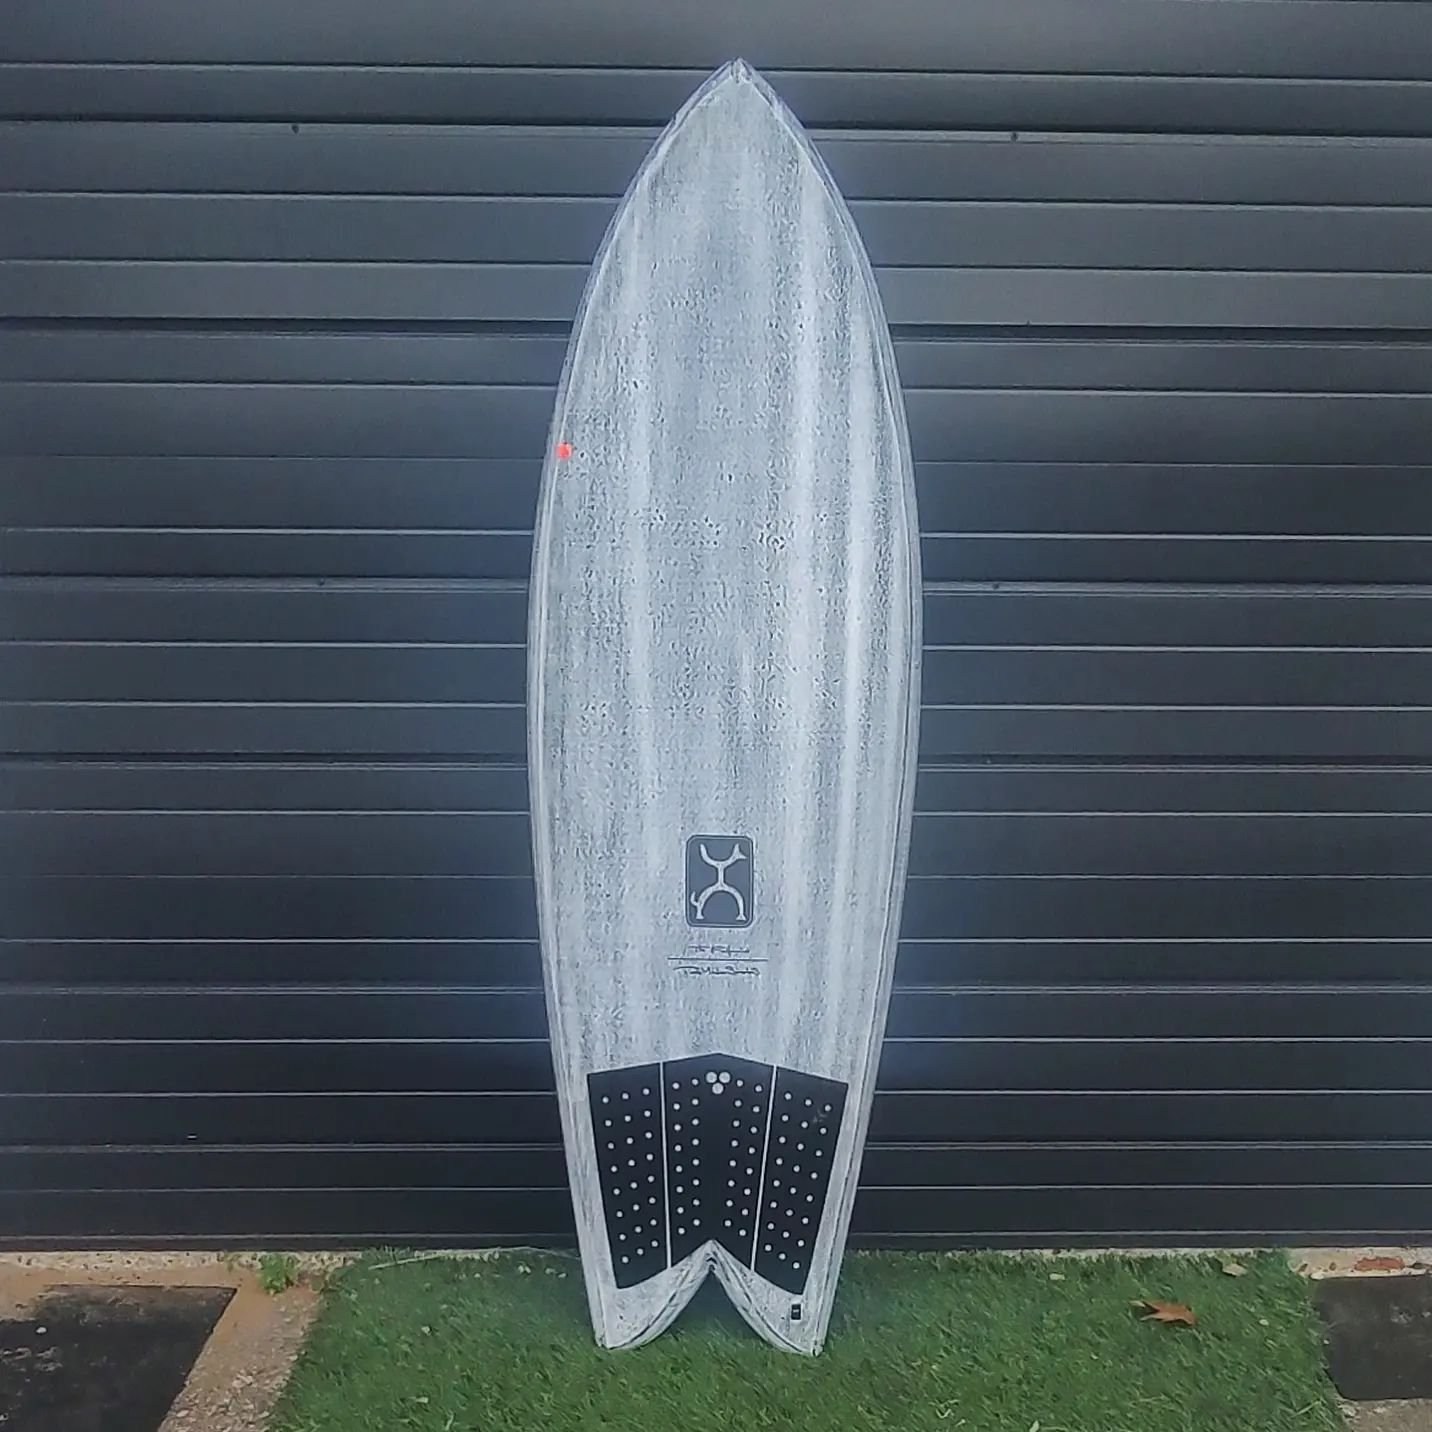 @firewiresurfboards Too Fish 5'11 22 1/8 x 2 11/16 38 L Volcanic construction Future twin
New condition only used a couple times $699